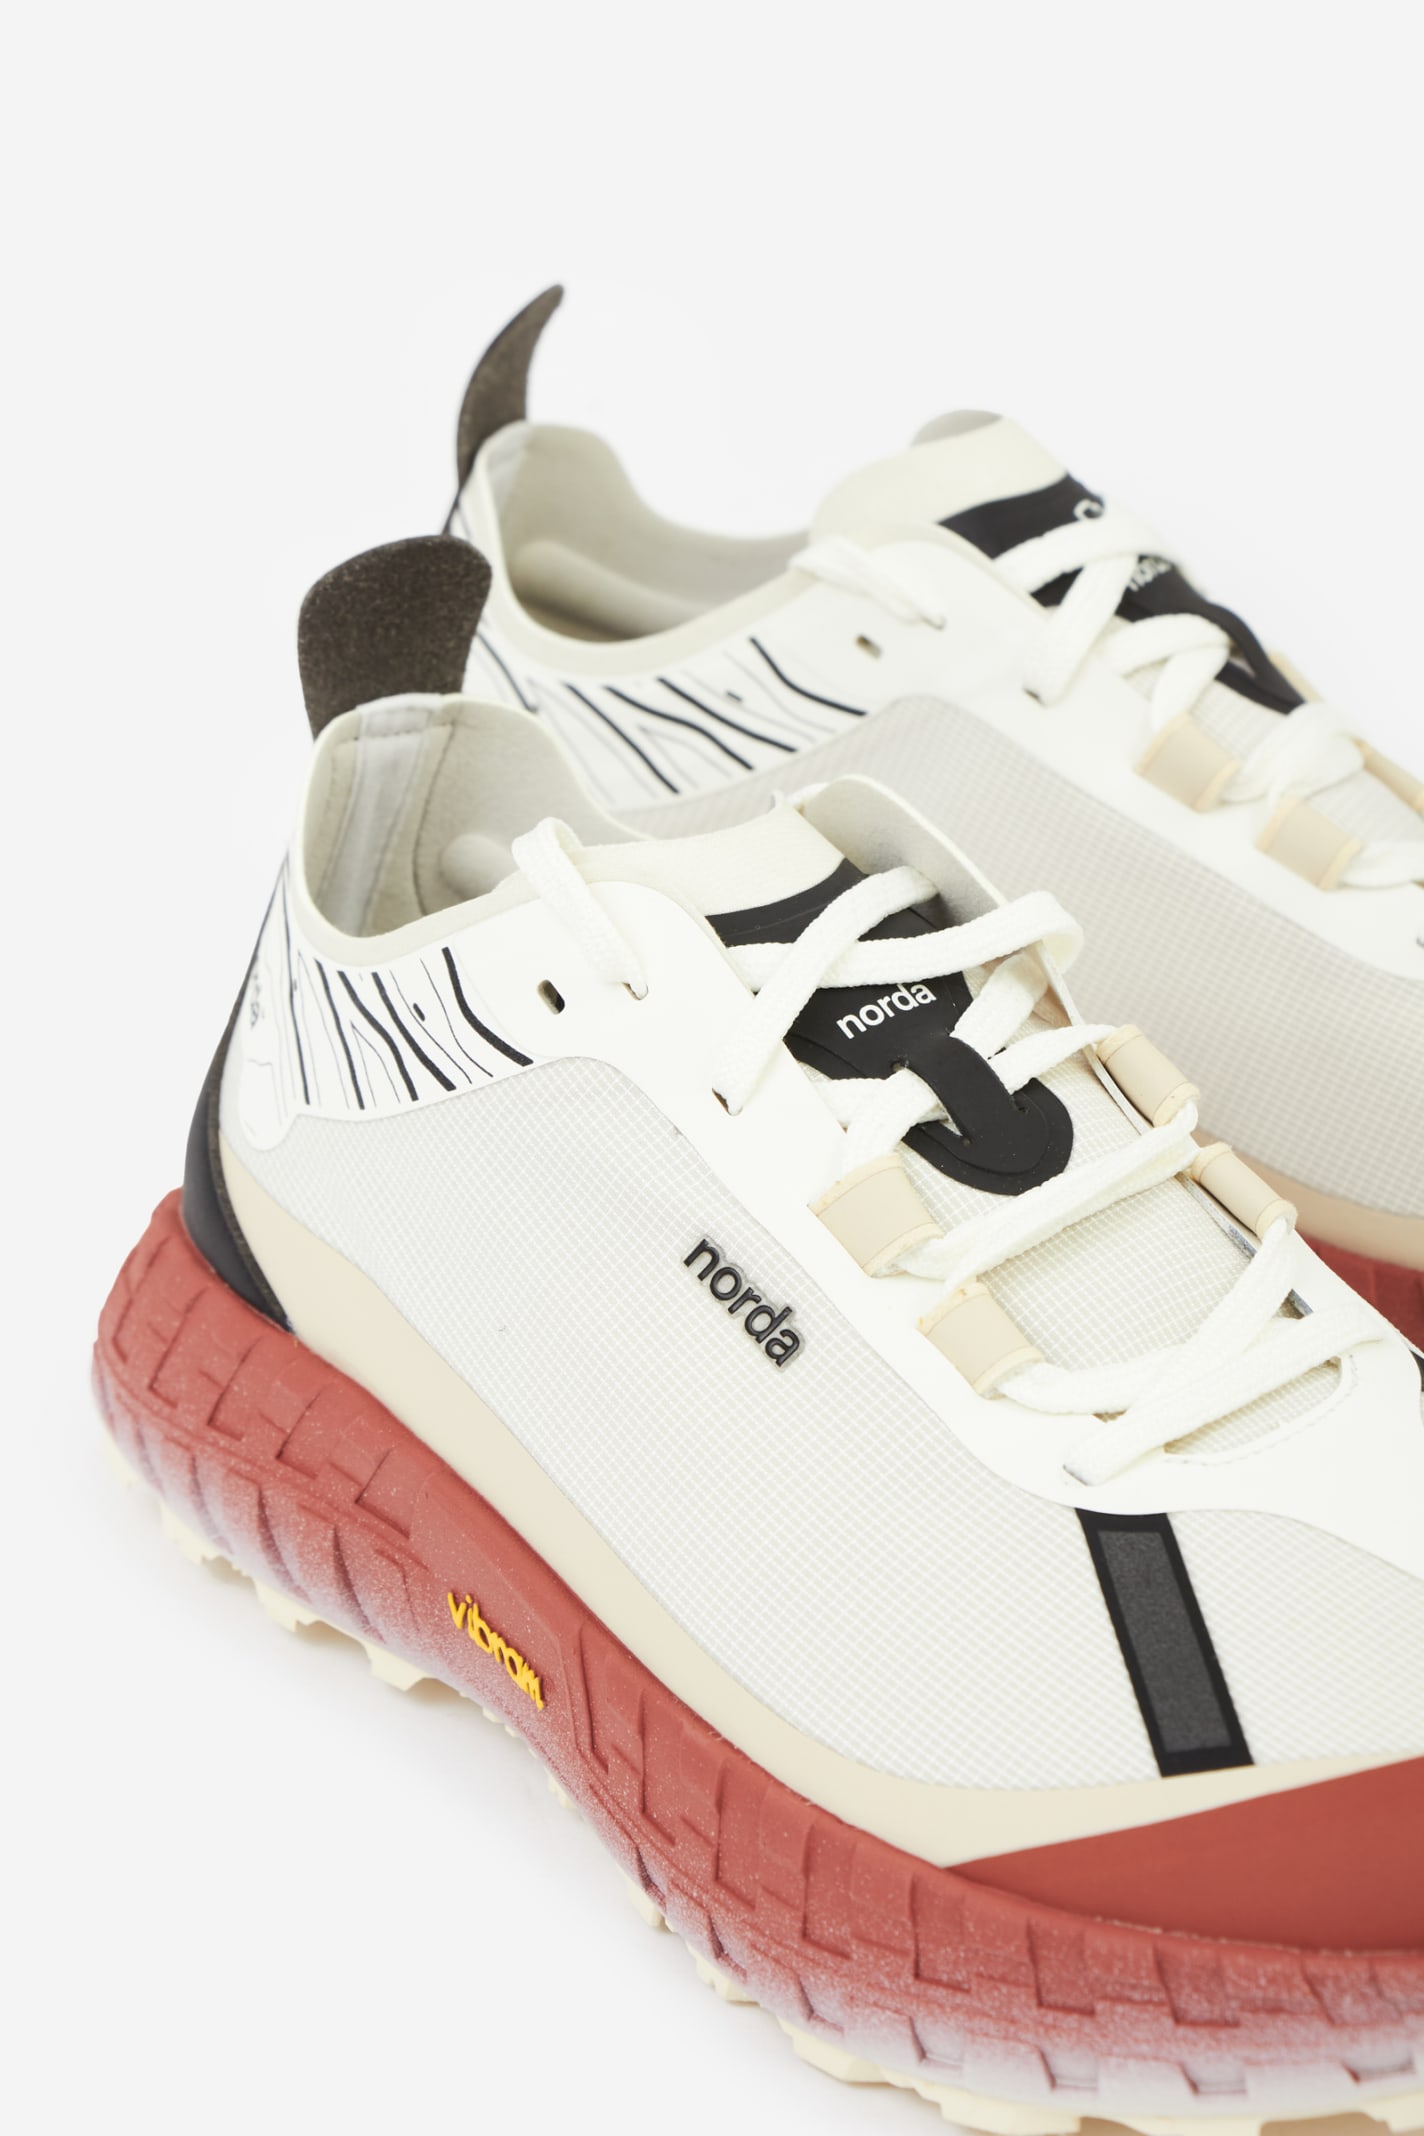 Shop Norda The 001 M Sneakers In White